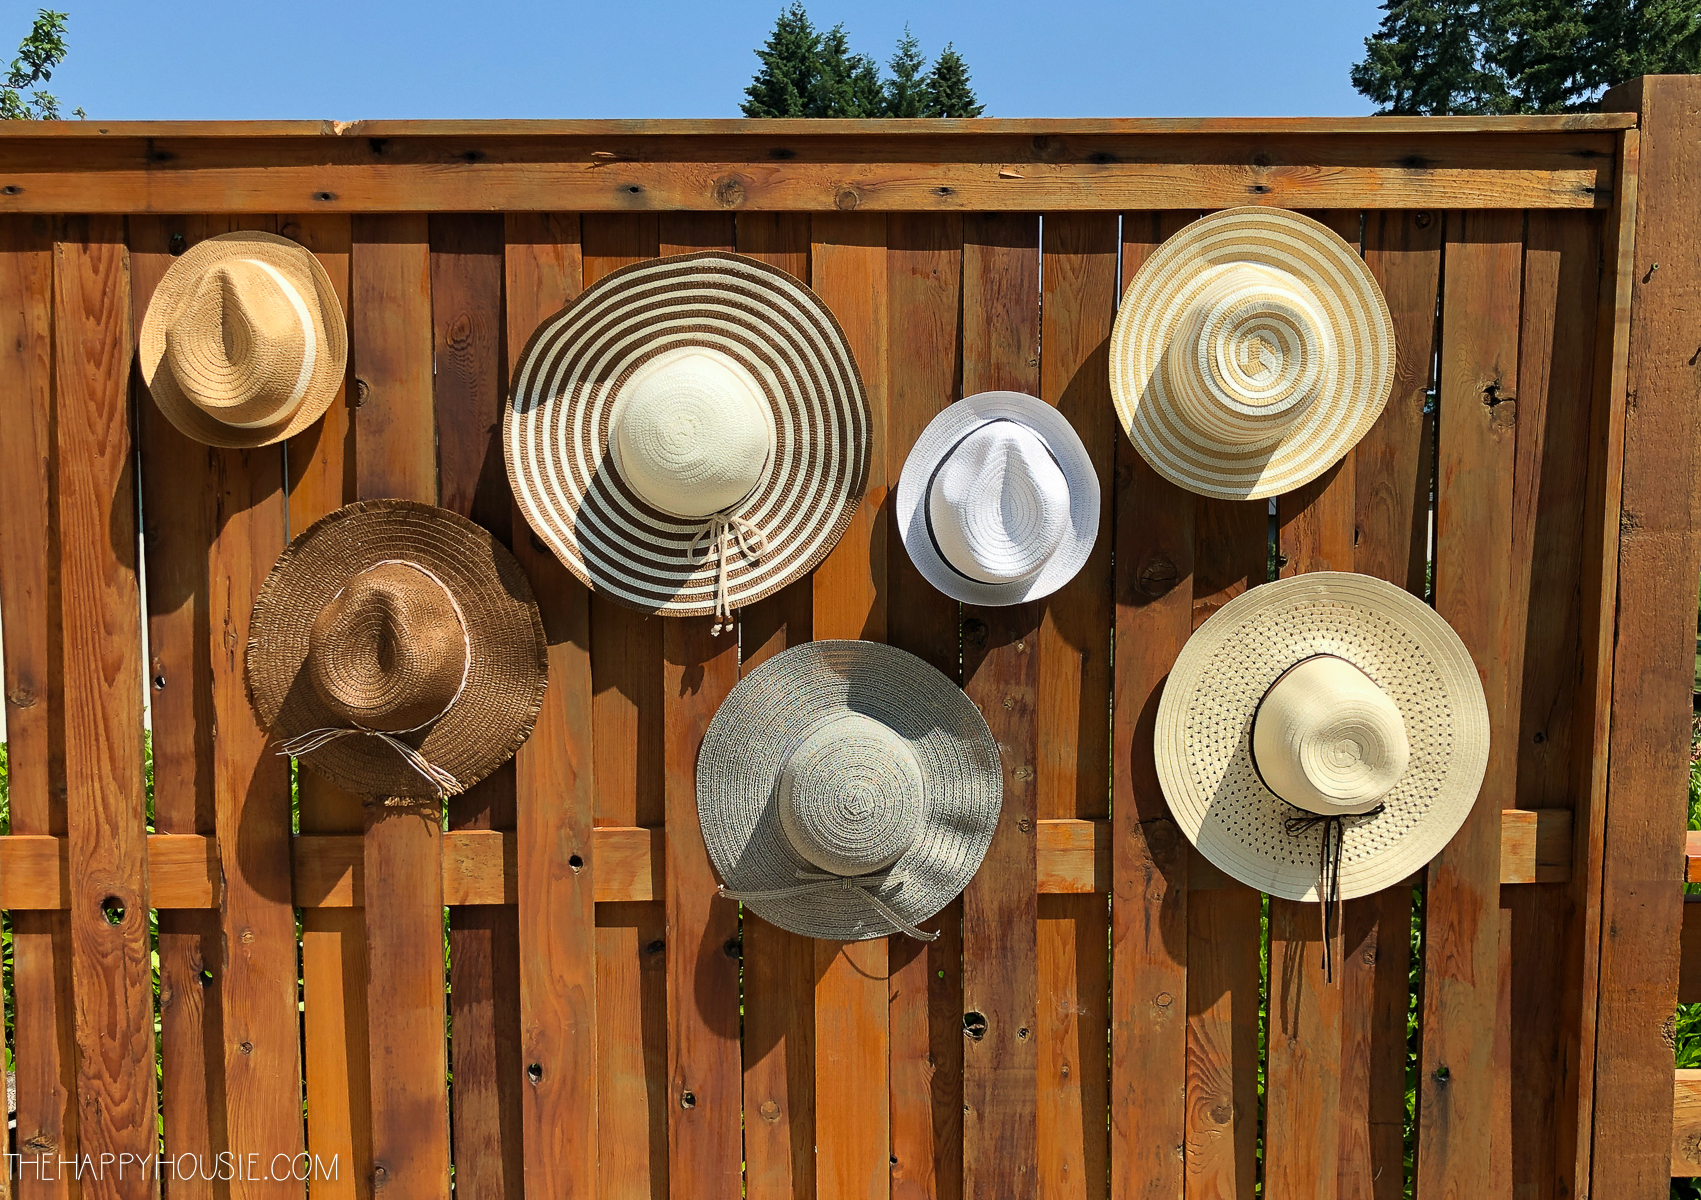 Hats on a wooden fence.